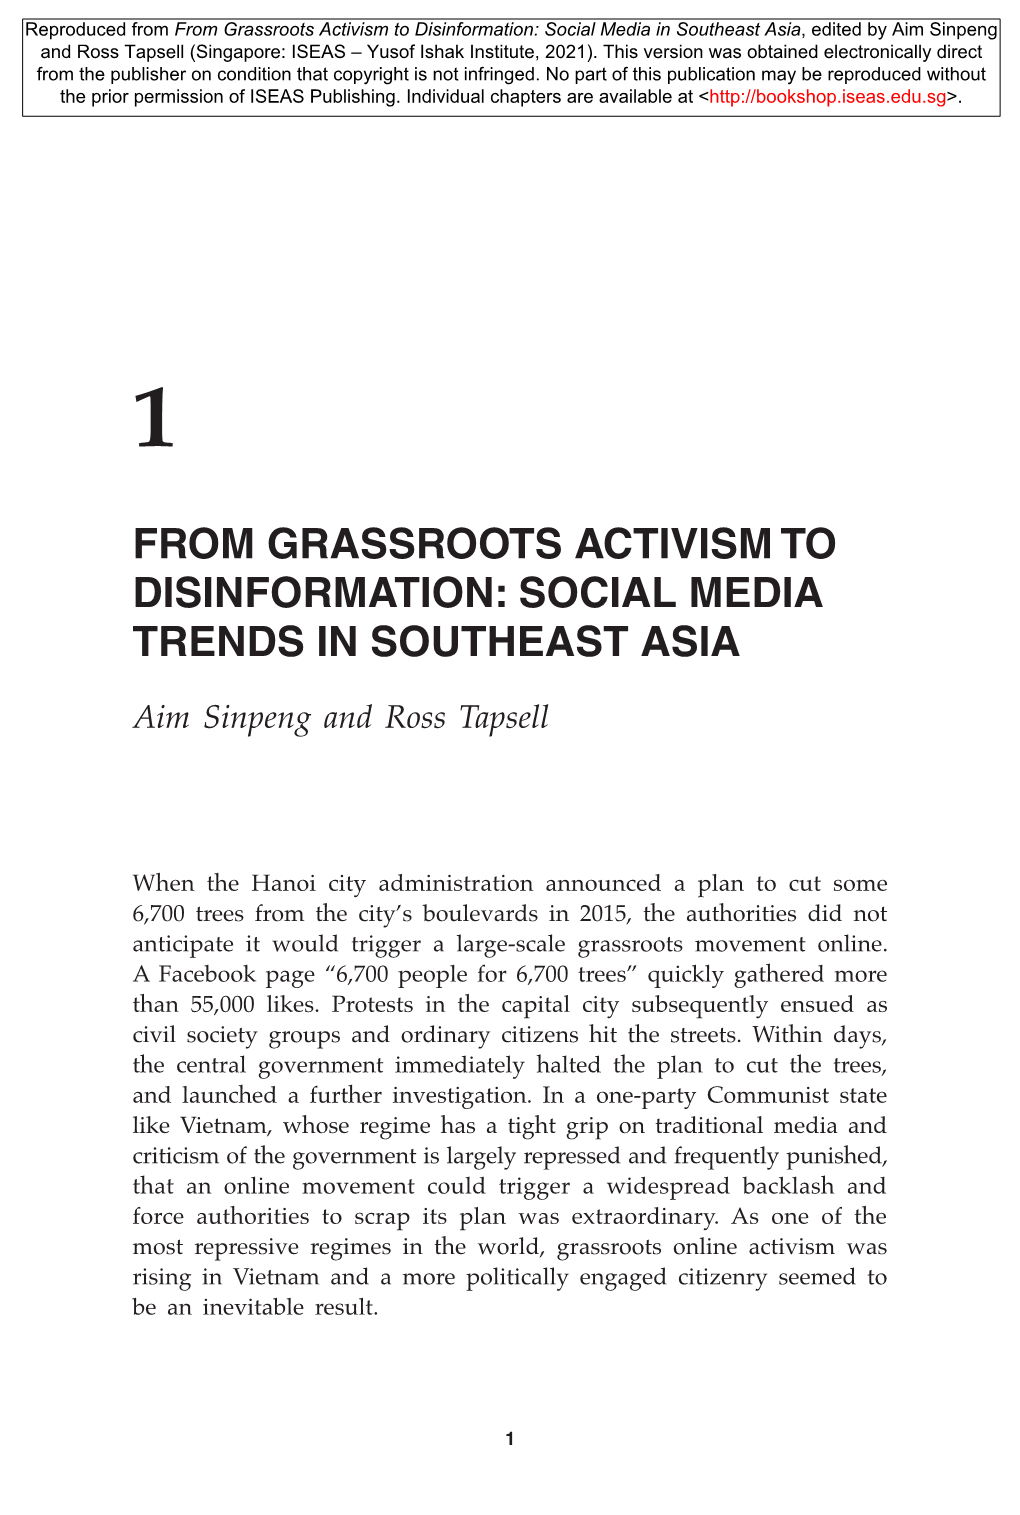 From Grassroots Activism to Disinformation: Social Media Trends in Southeast Asia